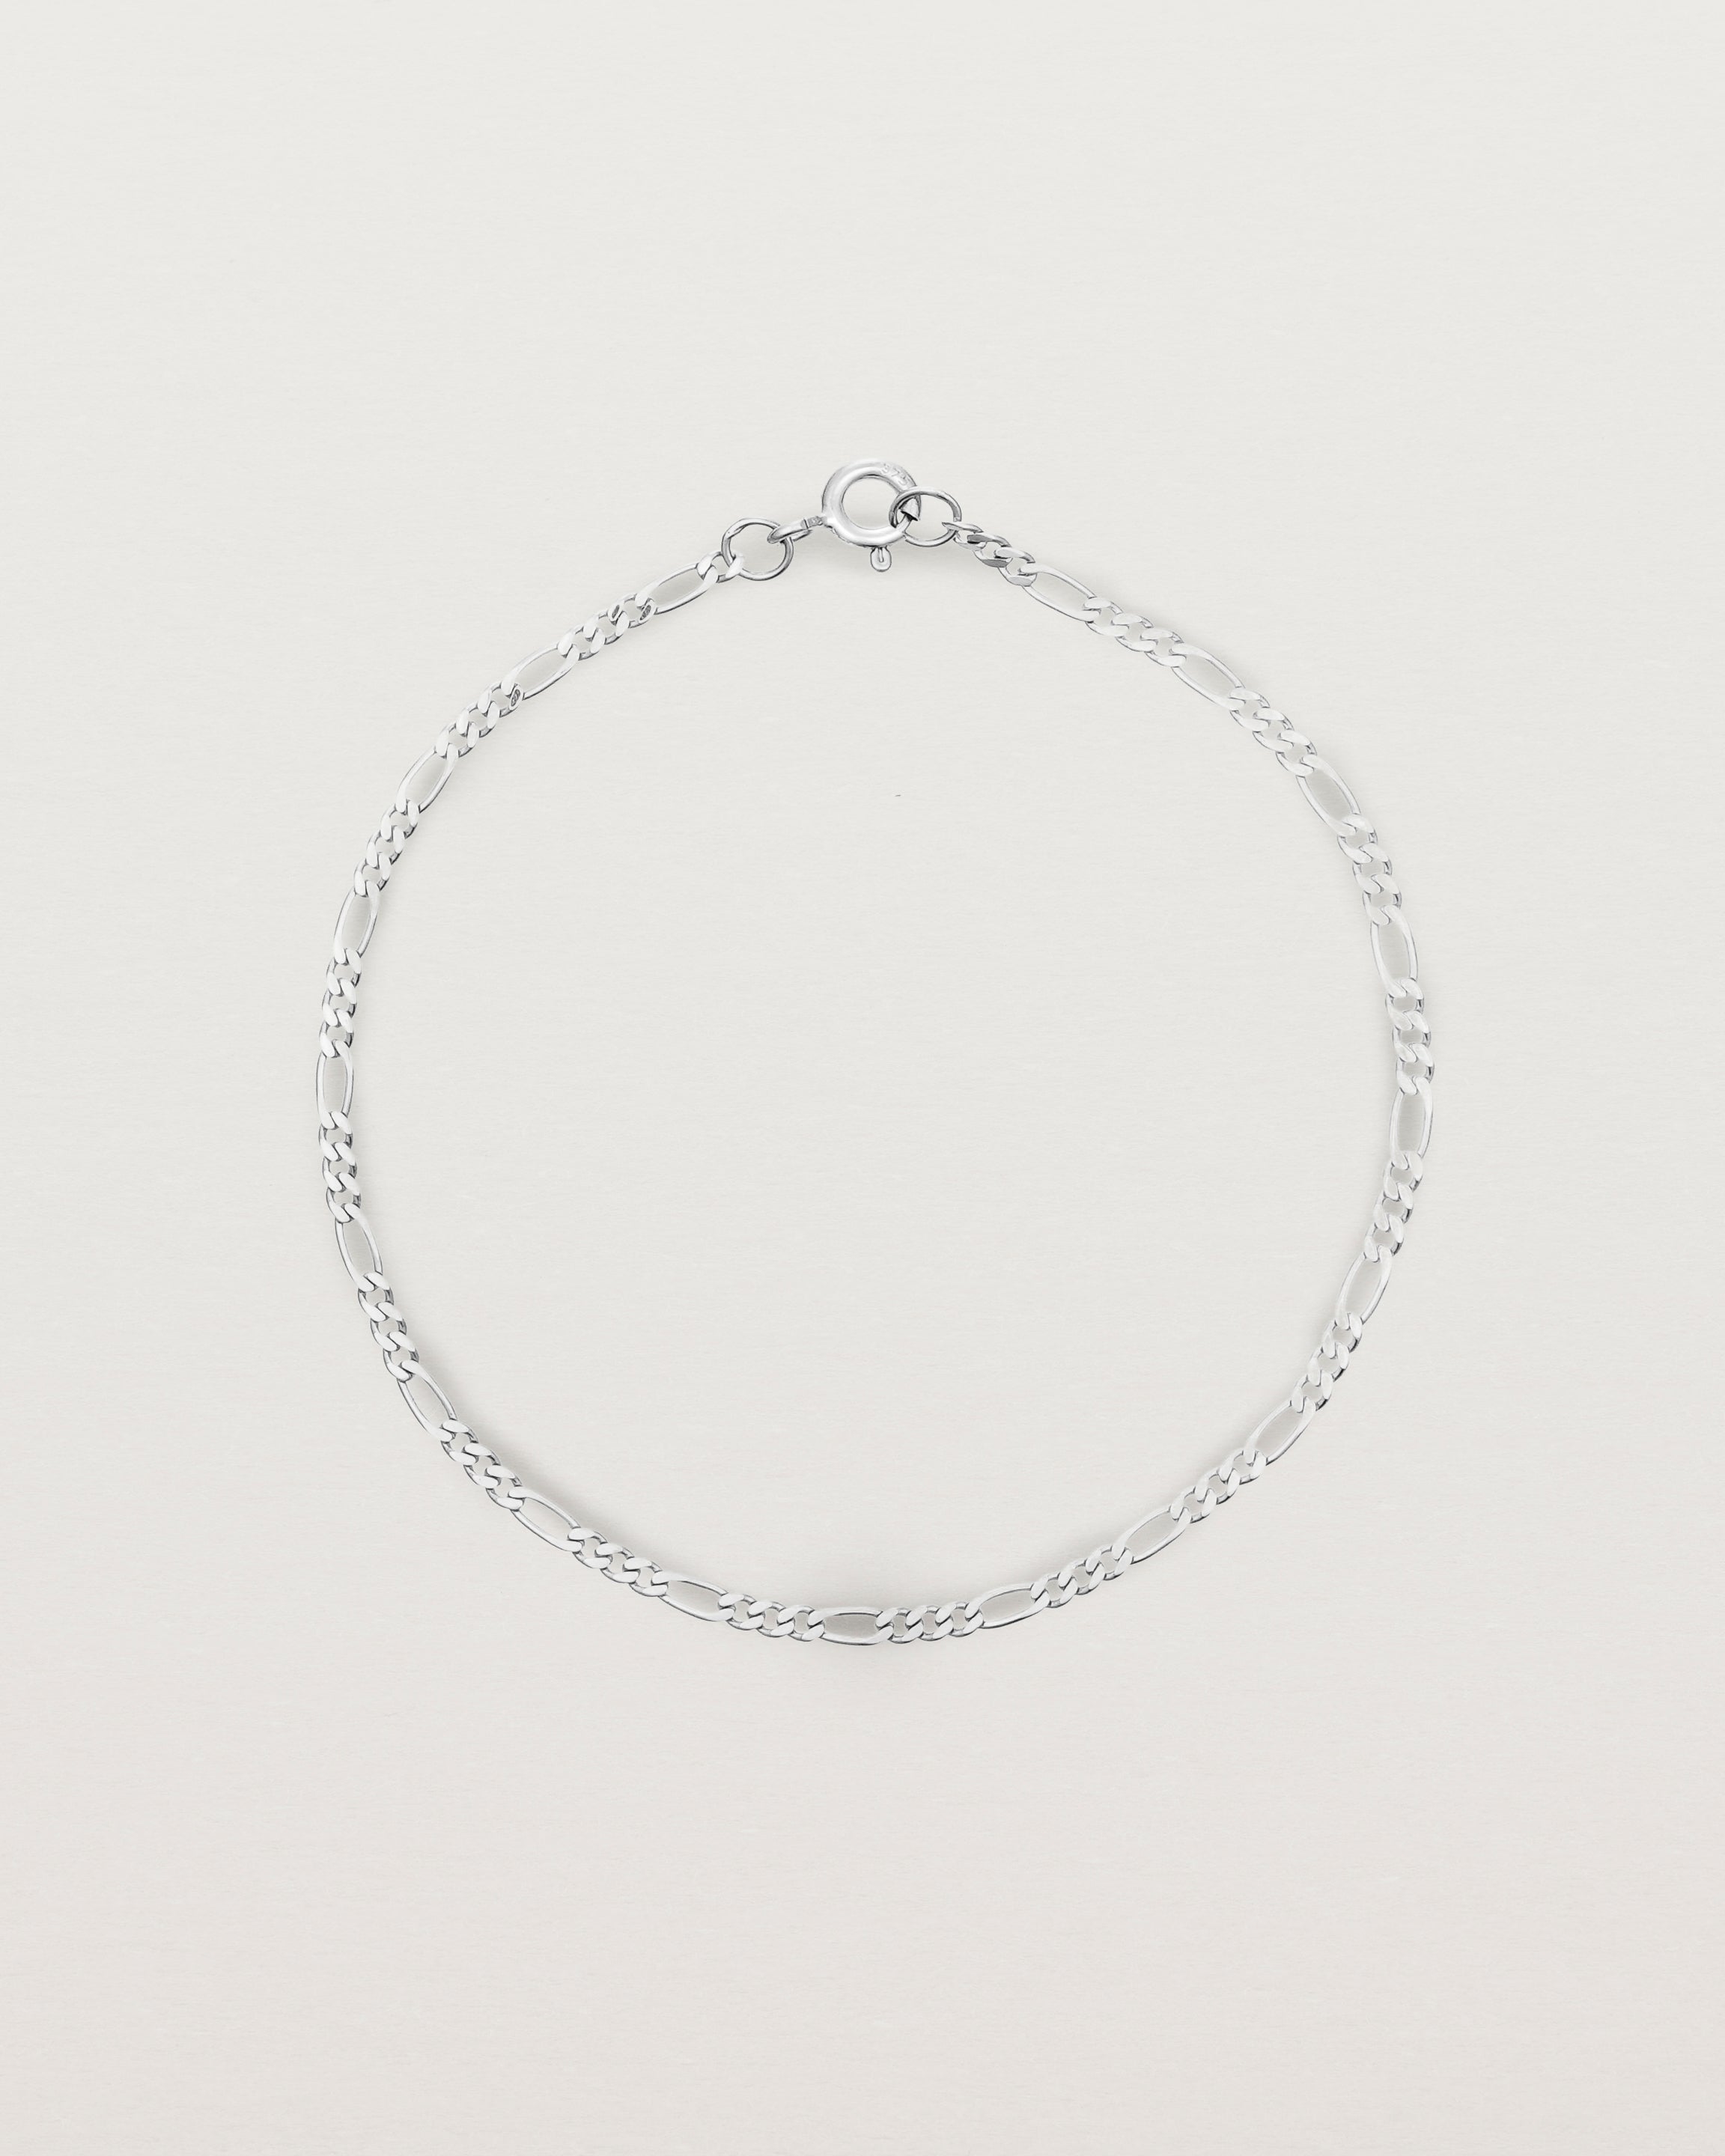 Our signature figaro chain in sterling silver